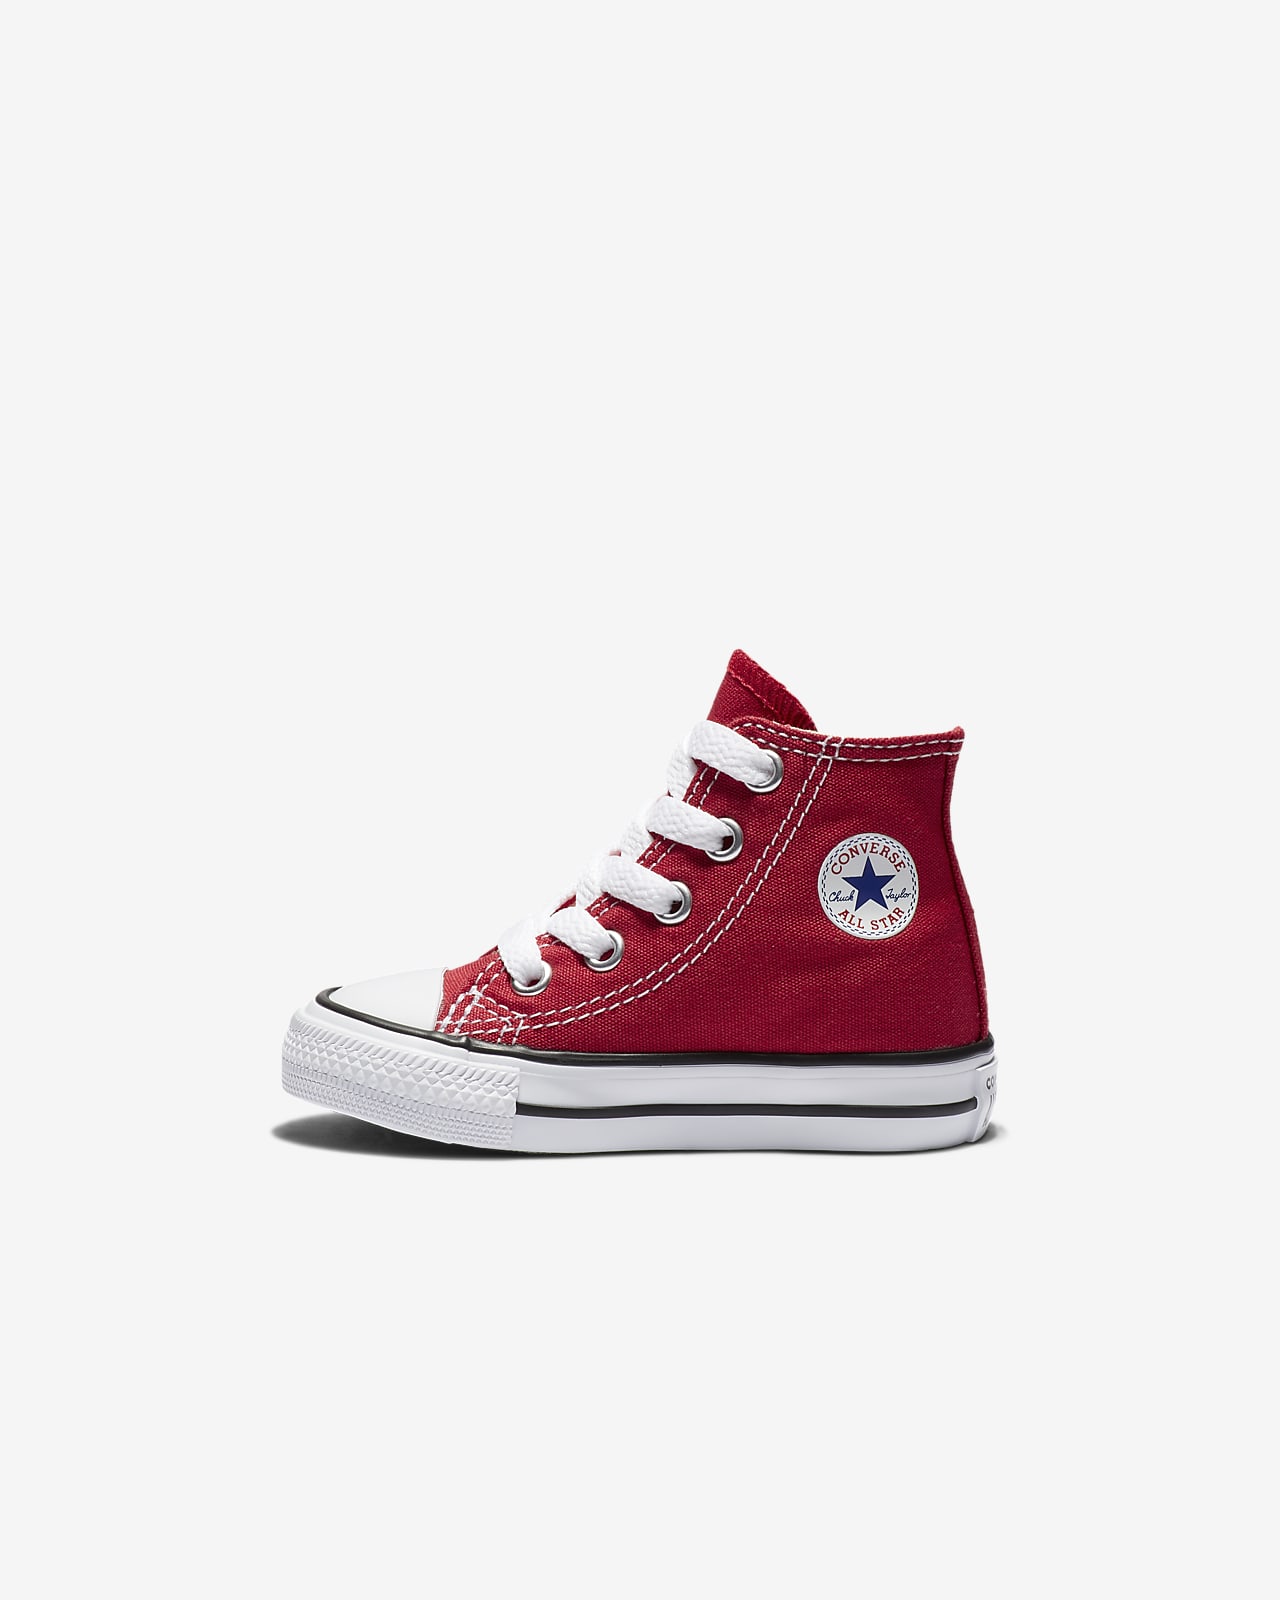 Converse Chuck Taylor All Star High Top Infant/Toddler Shoe 